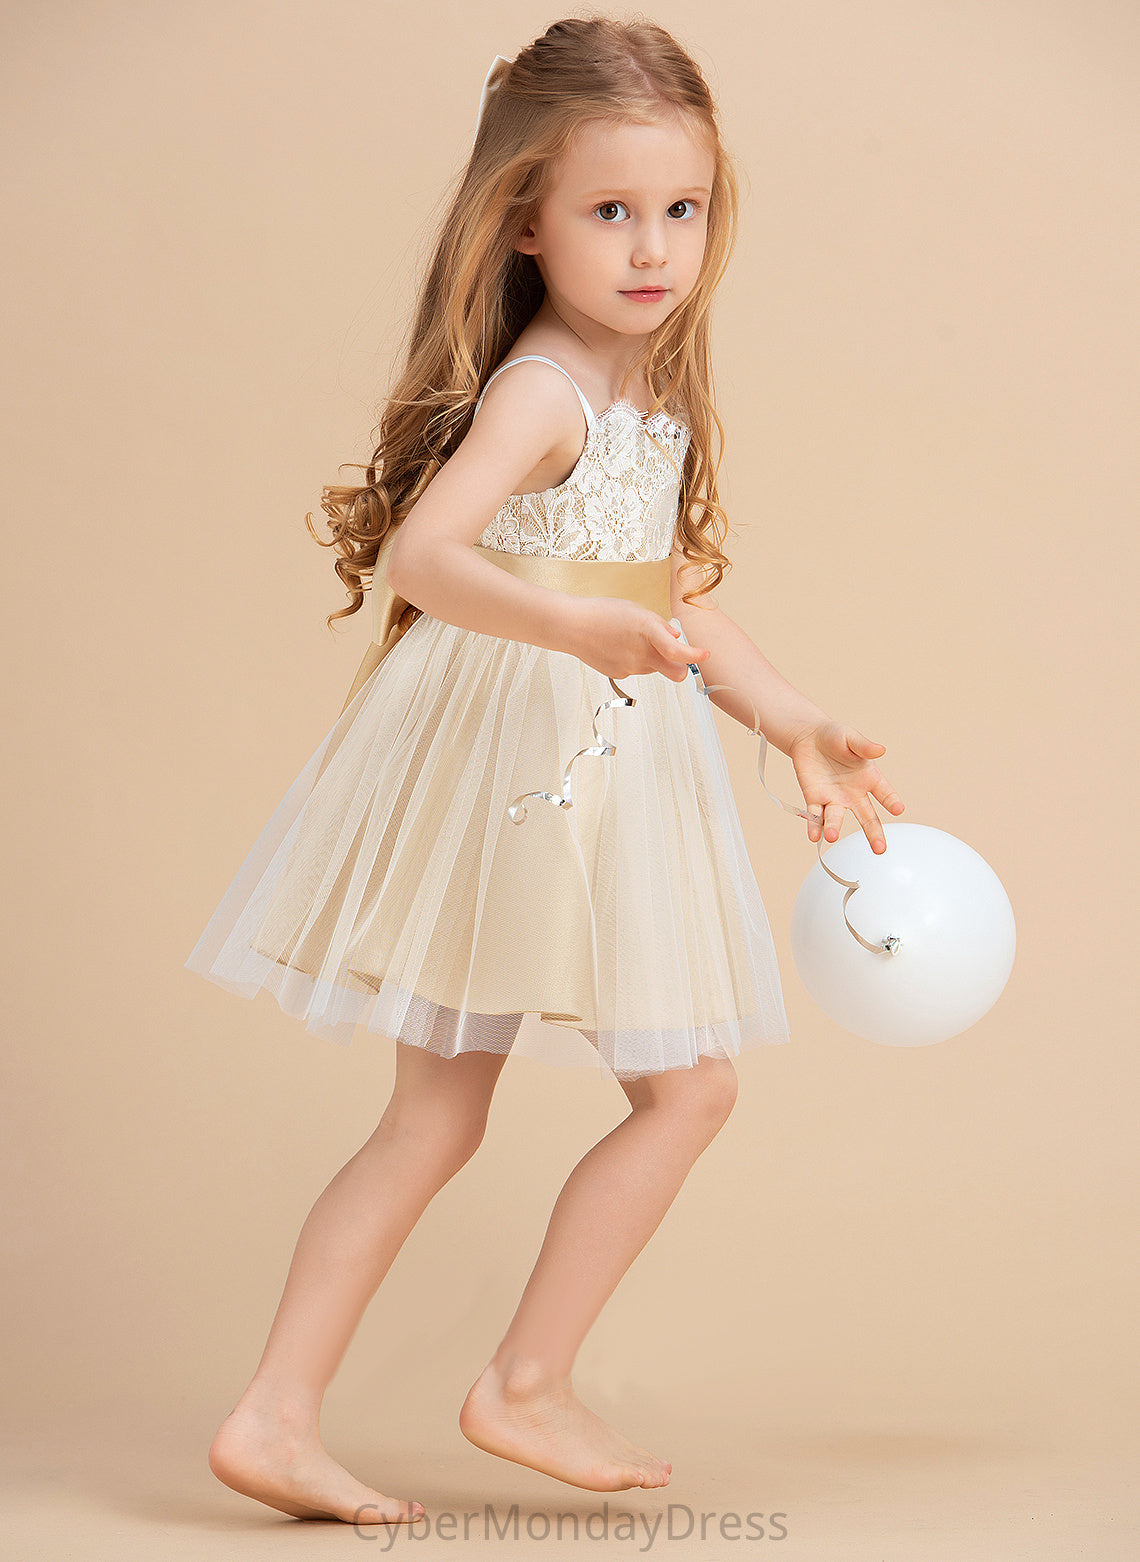 Tulle/Lace Straps Flower Girl Dresses Flower With Knee-length Sash/Bow(s) Girl (Undetachable A-Line/Princess Dress - Hayden Sleeveless sash)